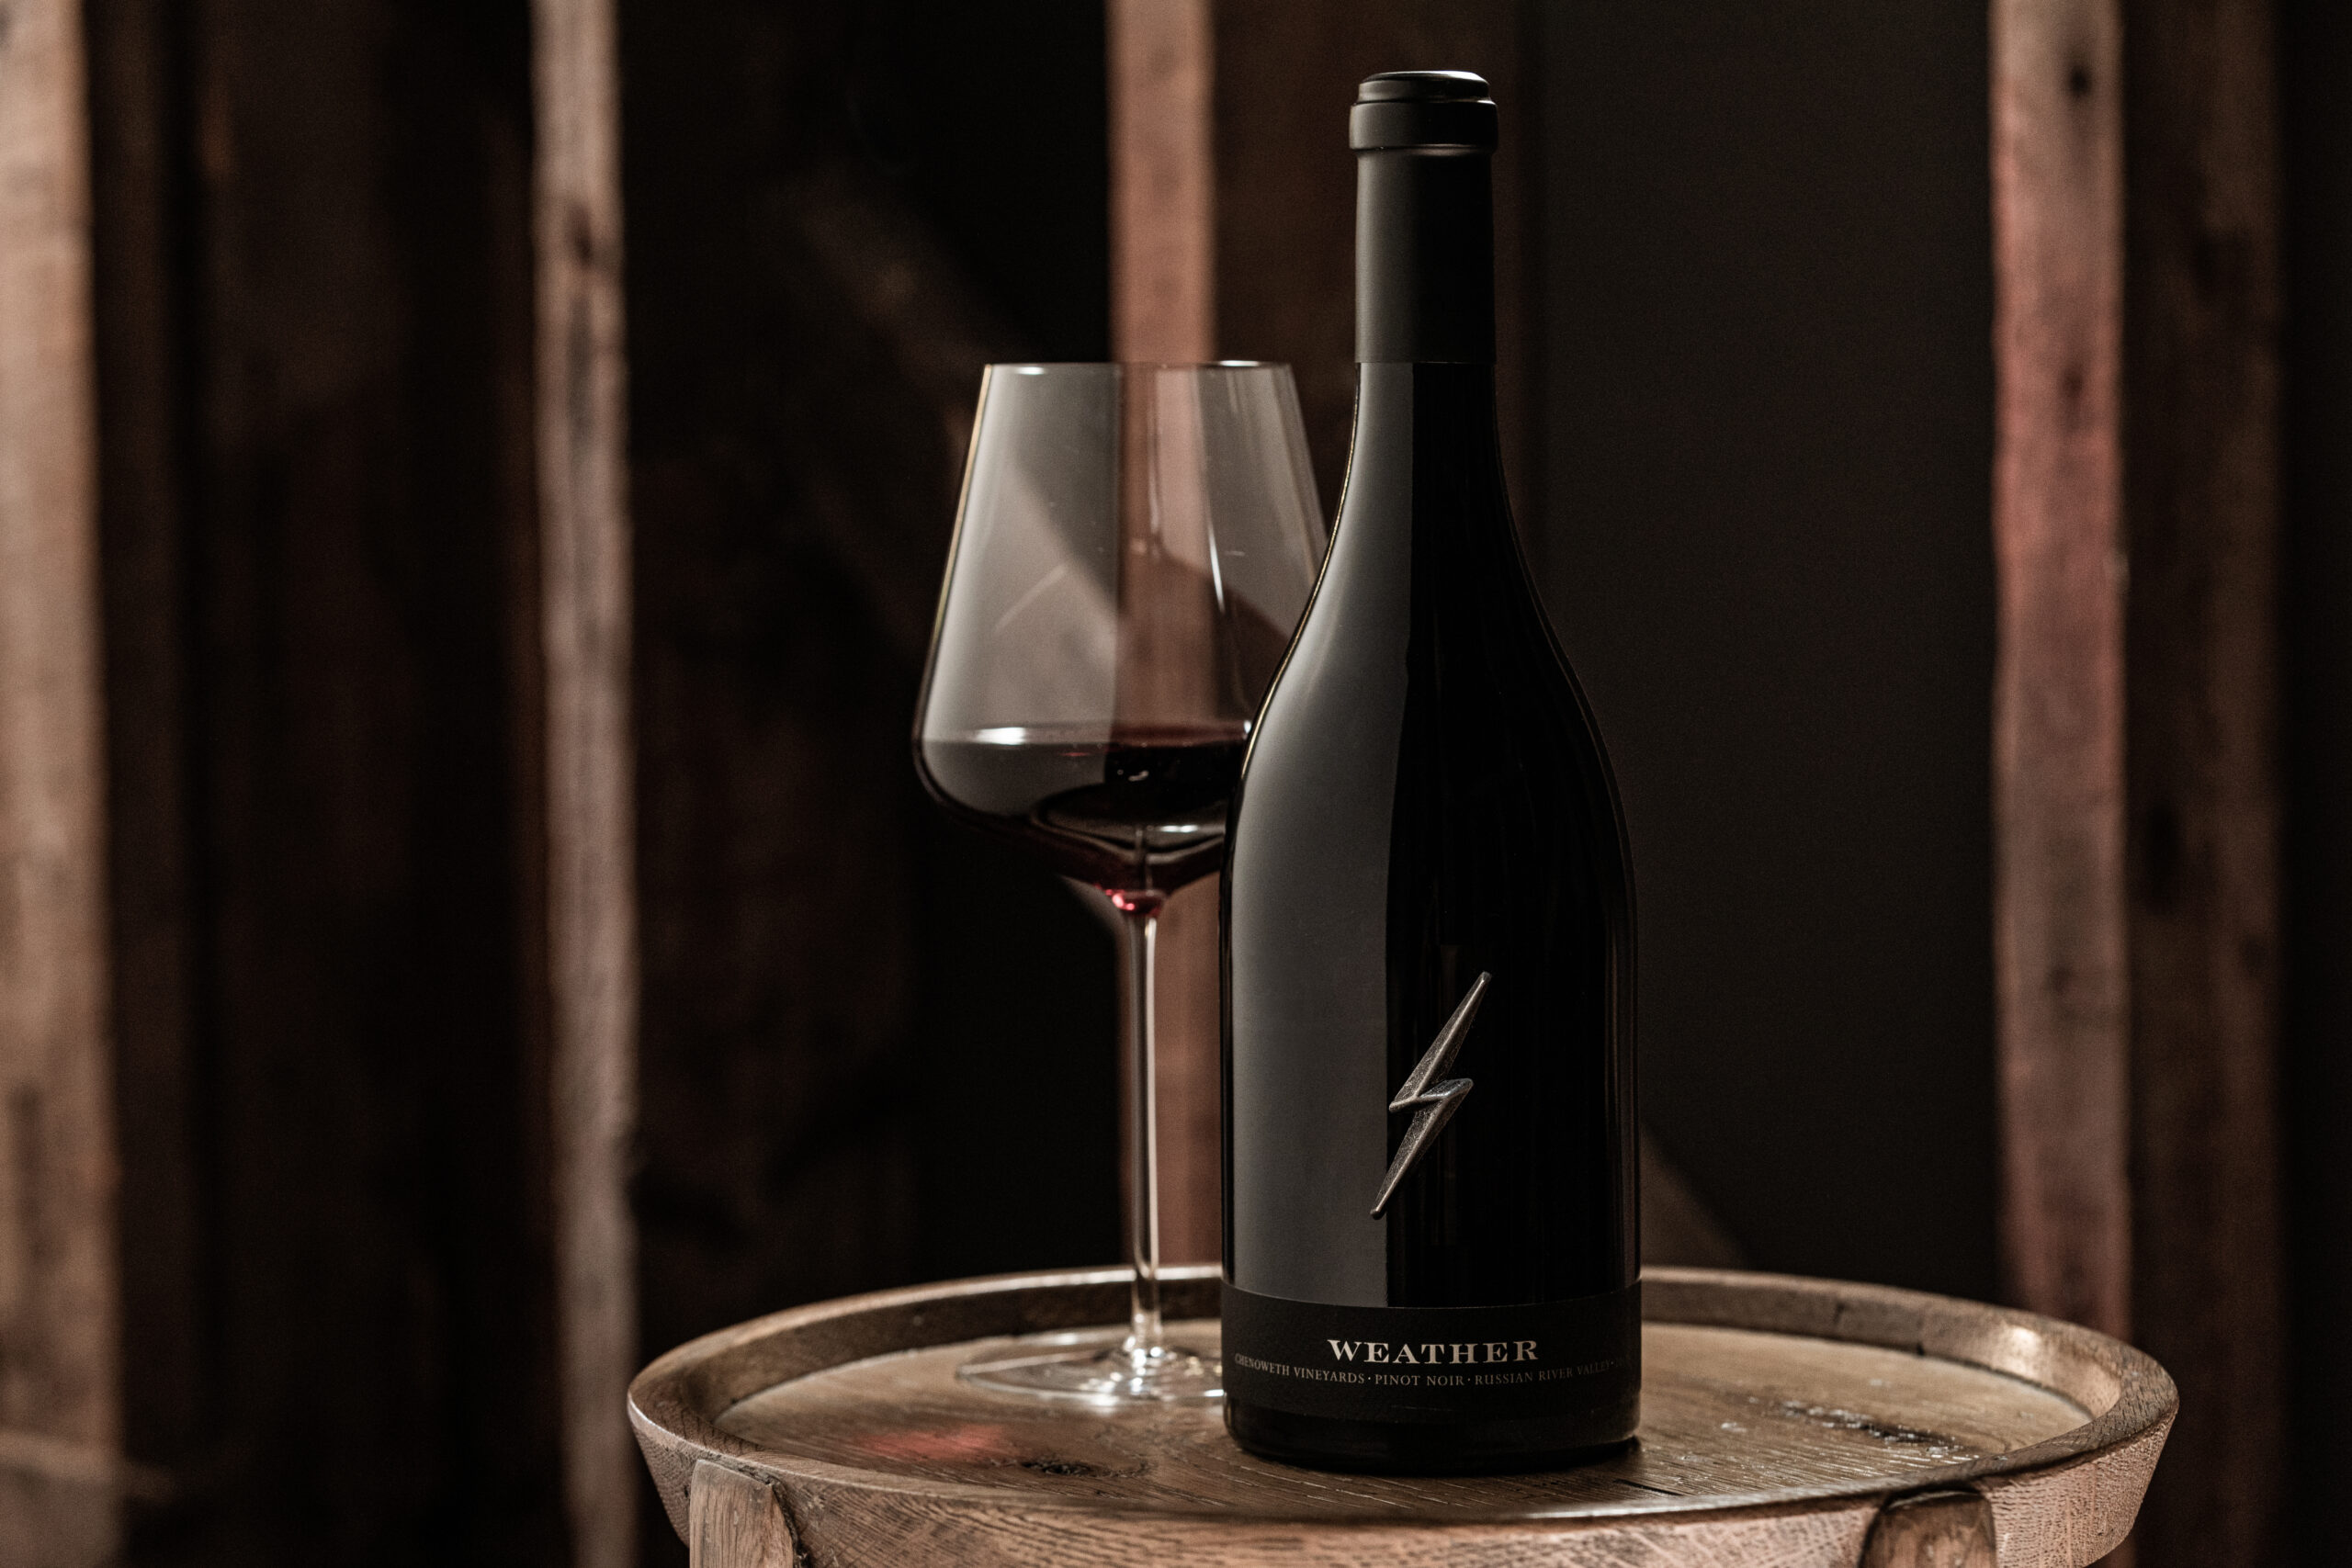 John Anthony Family of Wines debuts 2018 Weather Chenoweth Vineyard Russian River Valley Pinot Noir— adding second pinot noir to growing portfolio